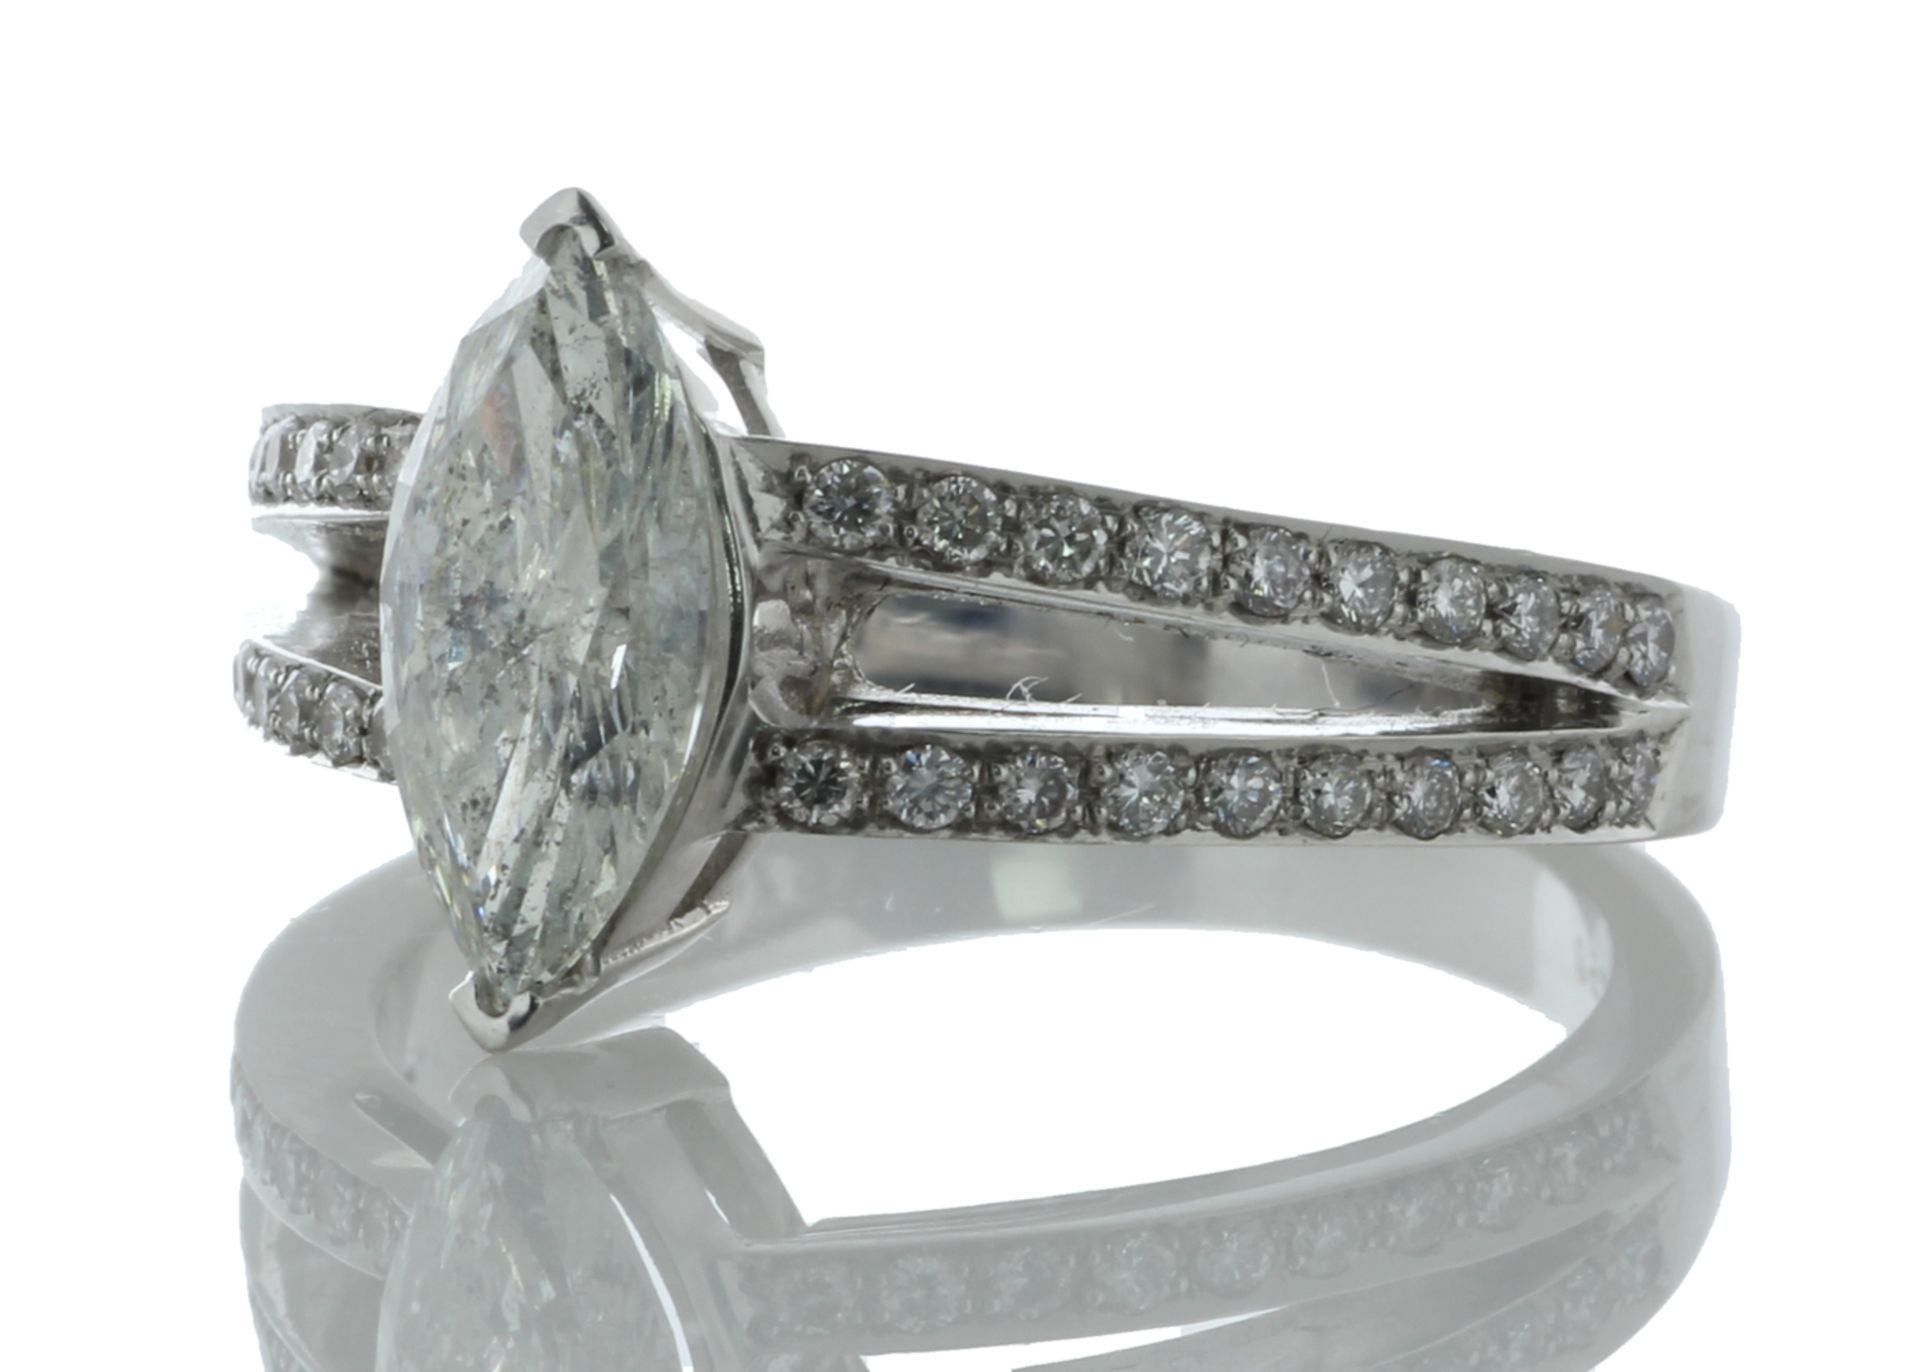 18ct White Gold Single Stone Pear Cut Diamond Ring (1.11) 1.41 Carats - Valued by GIE £17,465.00 - - Image 2 of 5